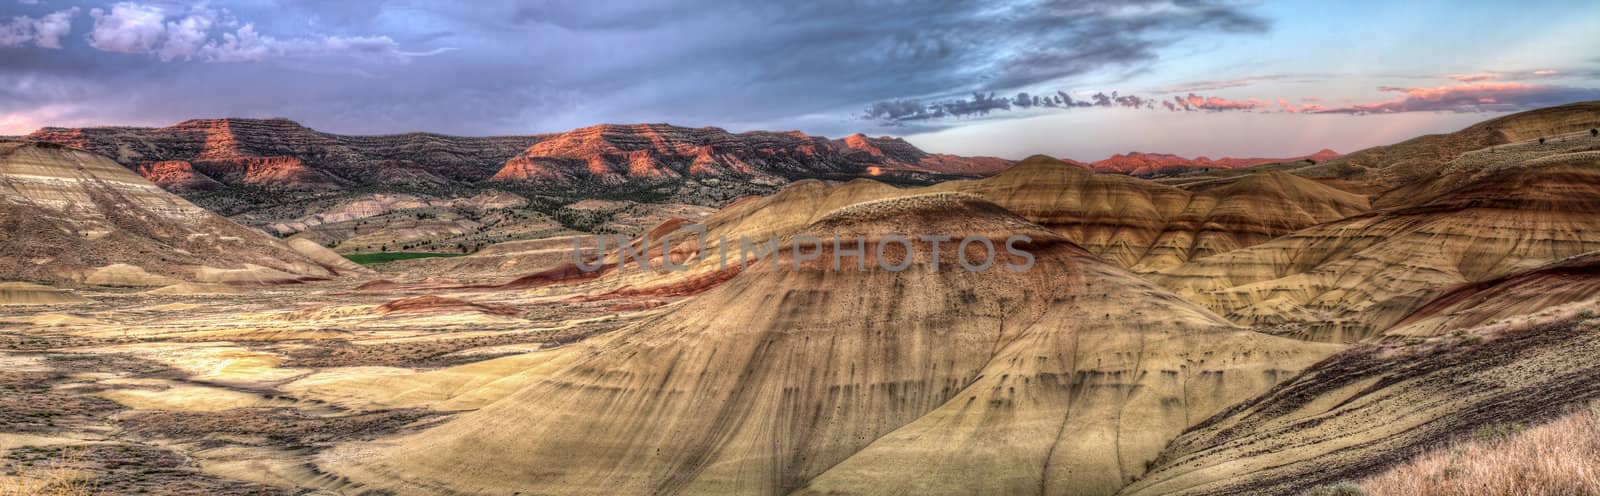 Painted Hills in John Day Fossil Beds National Monument Oregon Panorama